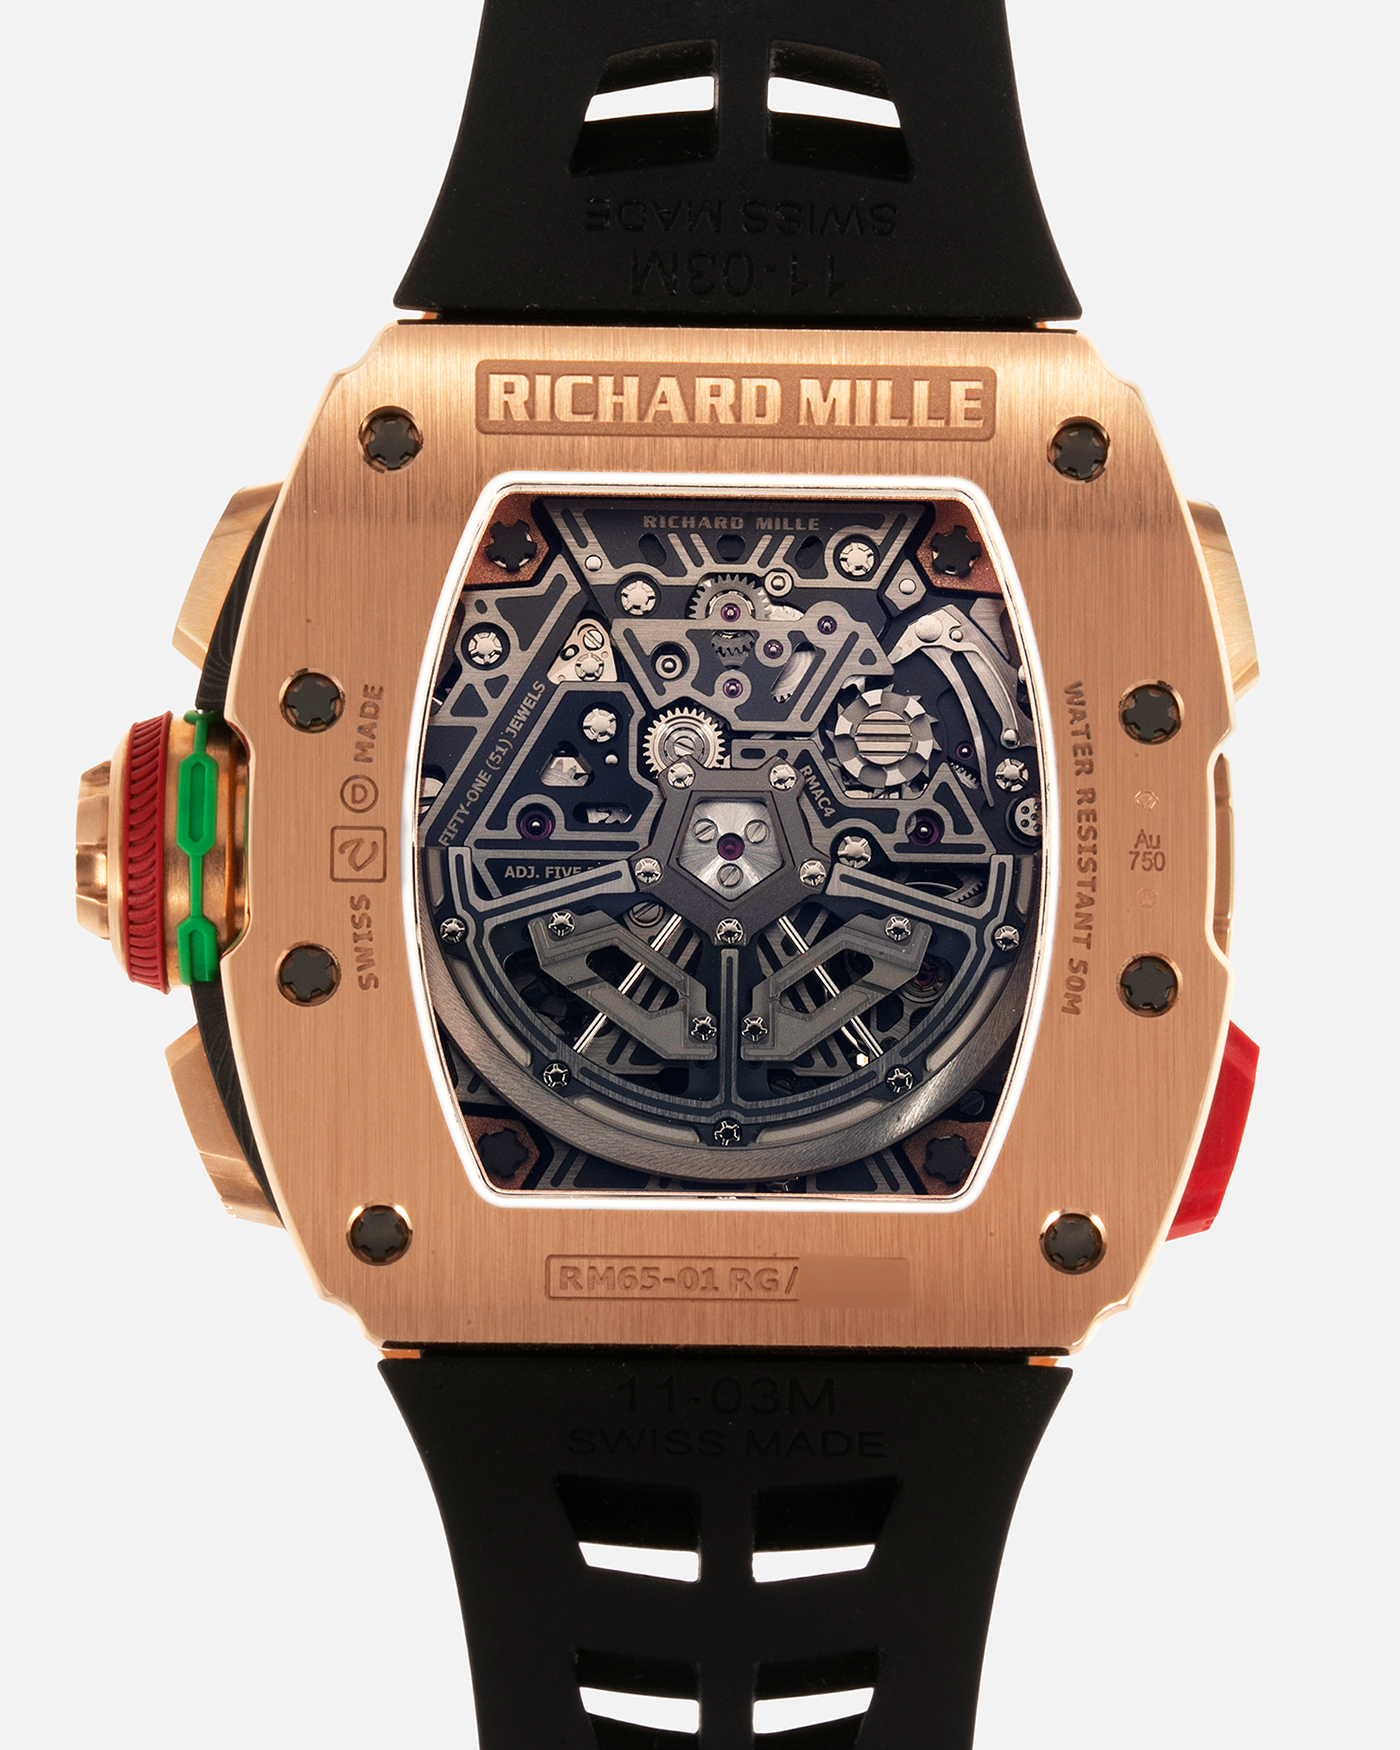 Brand: Richard Mille Year: 2022 Model: RM65-01 Material: 18-carat Rose Gold Movement: Cal. RMAC4, Self-Winding Case Diameter: 44mm x 49.9mm Bracelet: Richard Mille Black Rubber Strap with Signed 18-carat Rose Gold Deployant Clasp